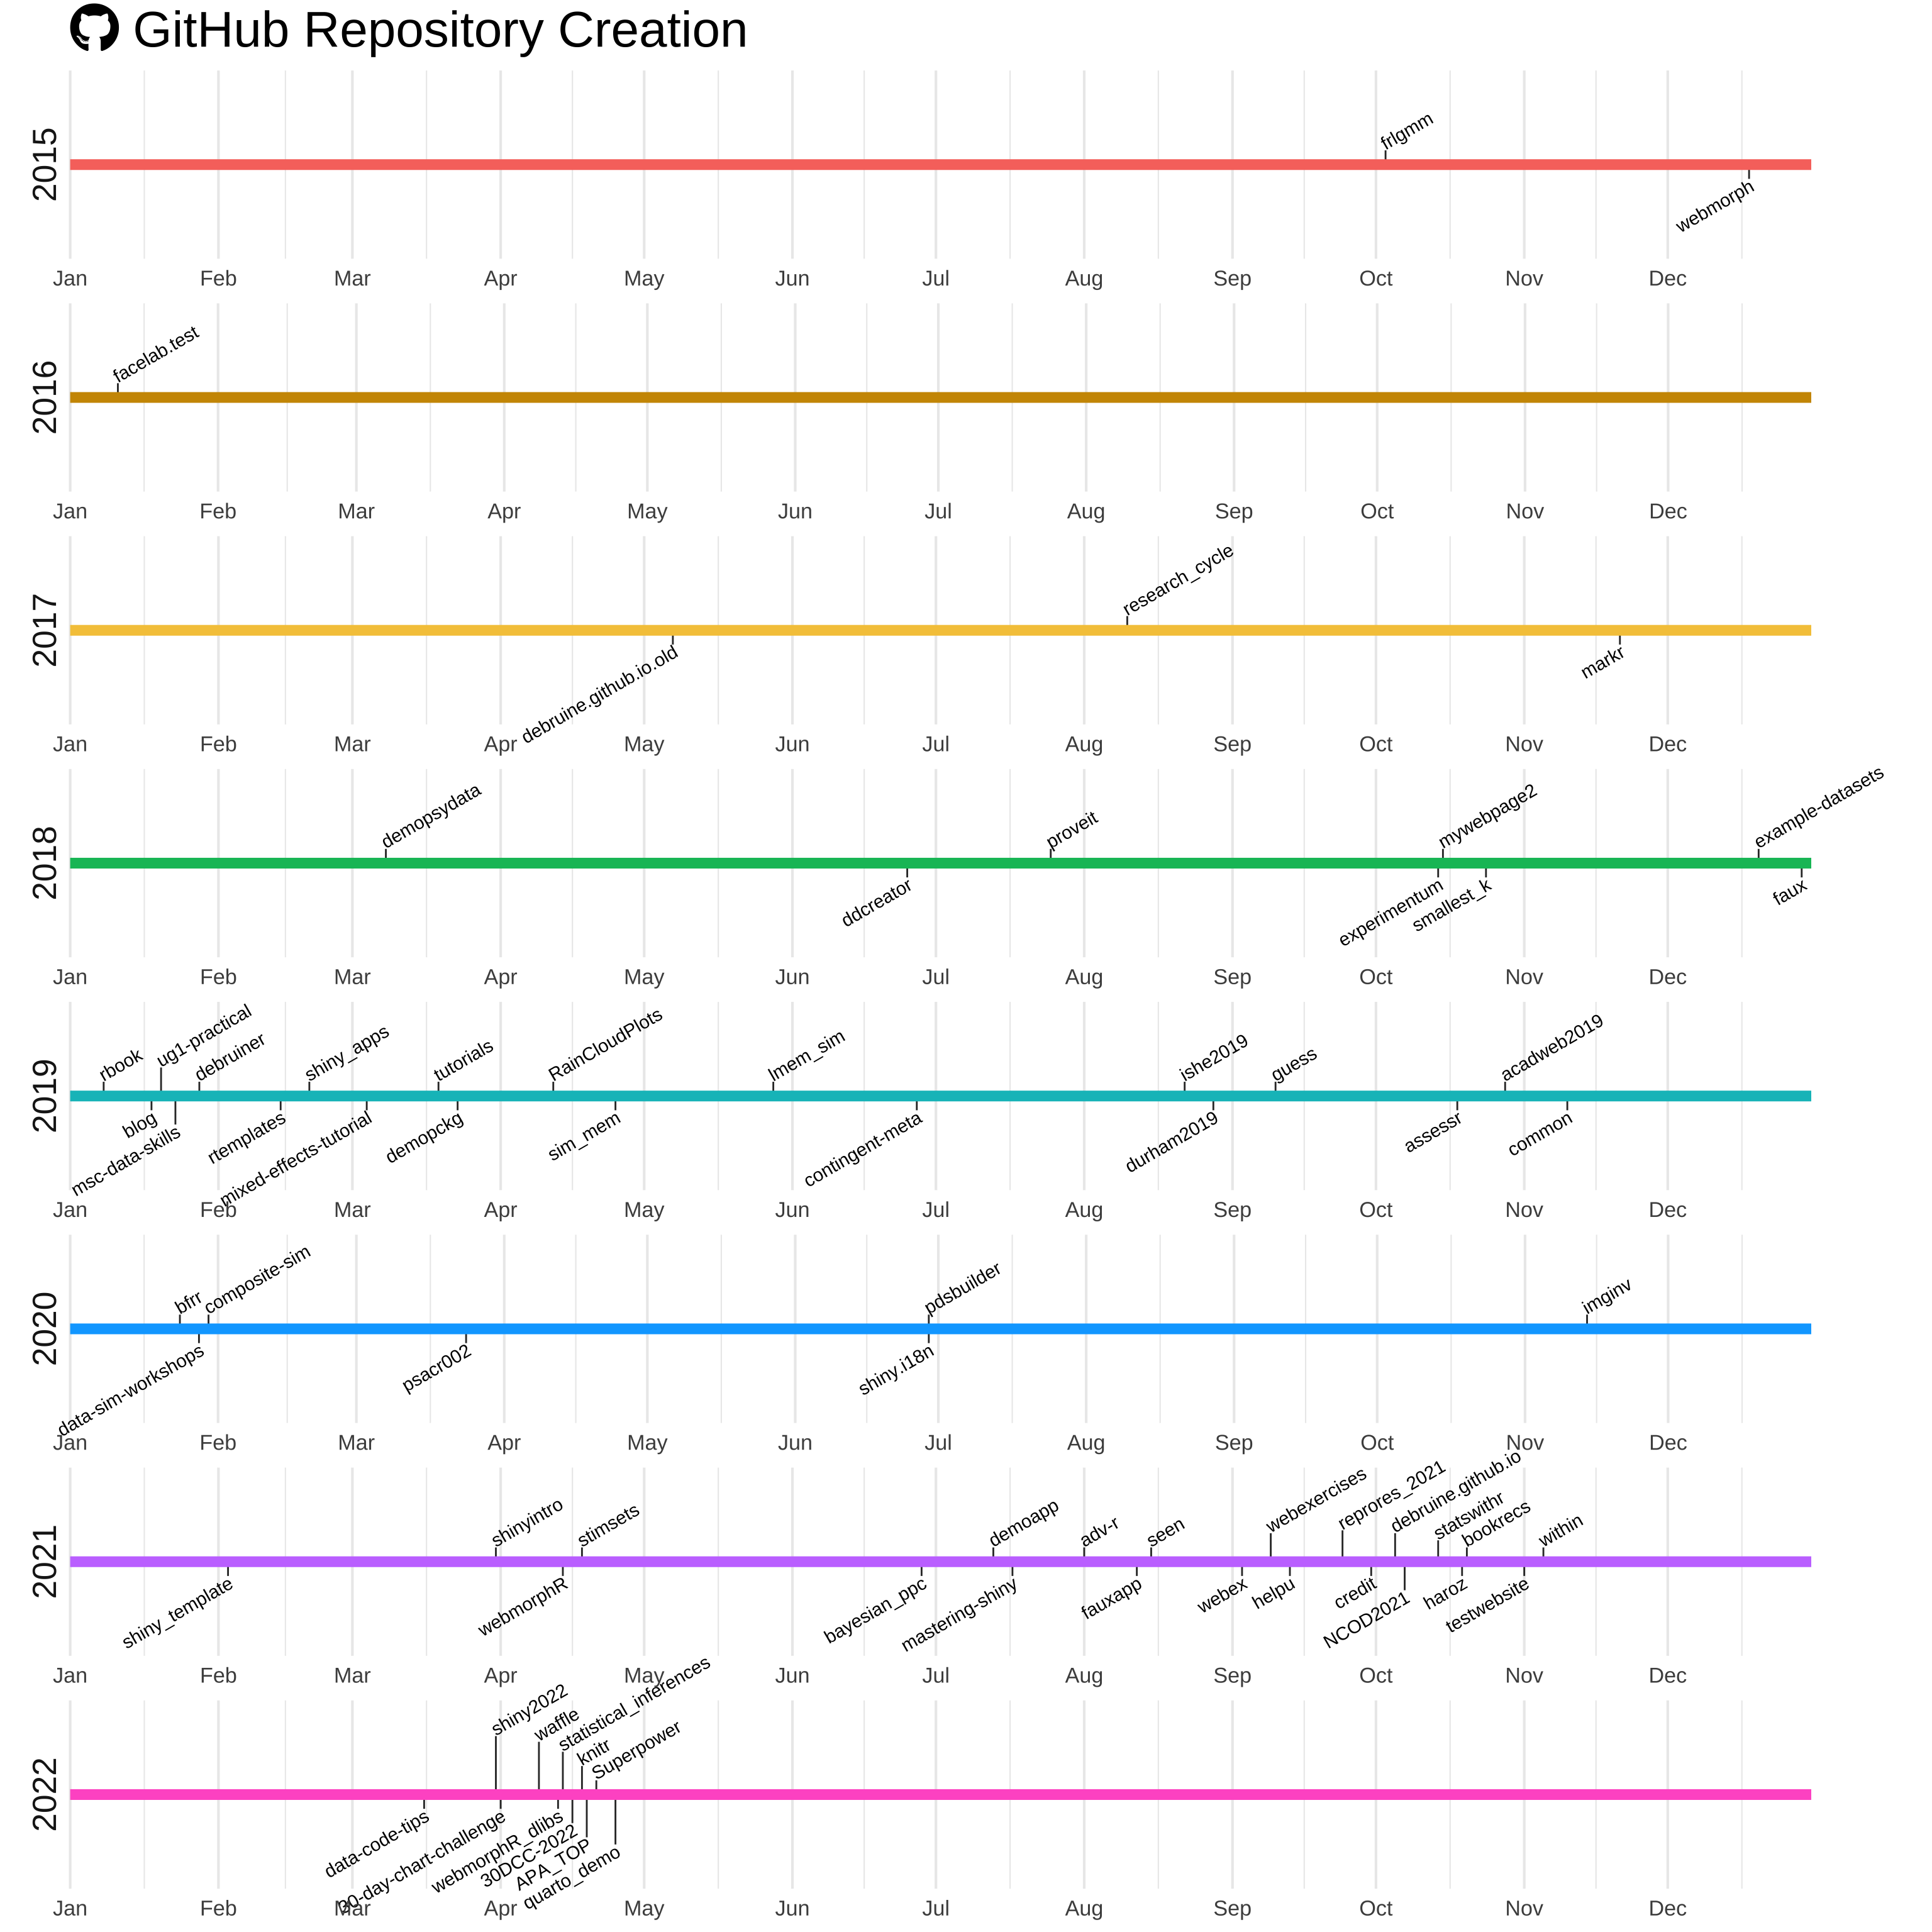 A timeline of github repository creation from 2015 to 2022. The first few years only have a few repos, which the most recent months have tens of repos.